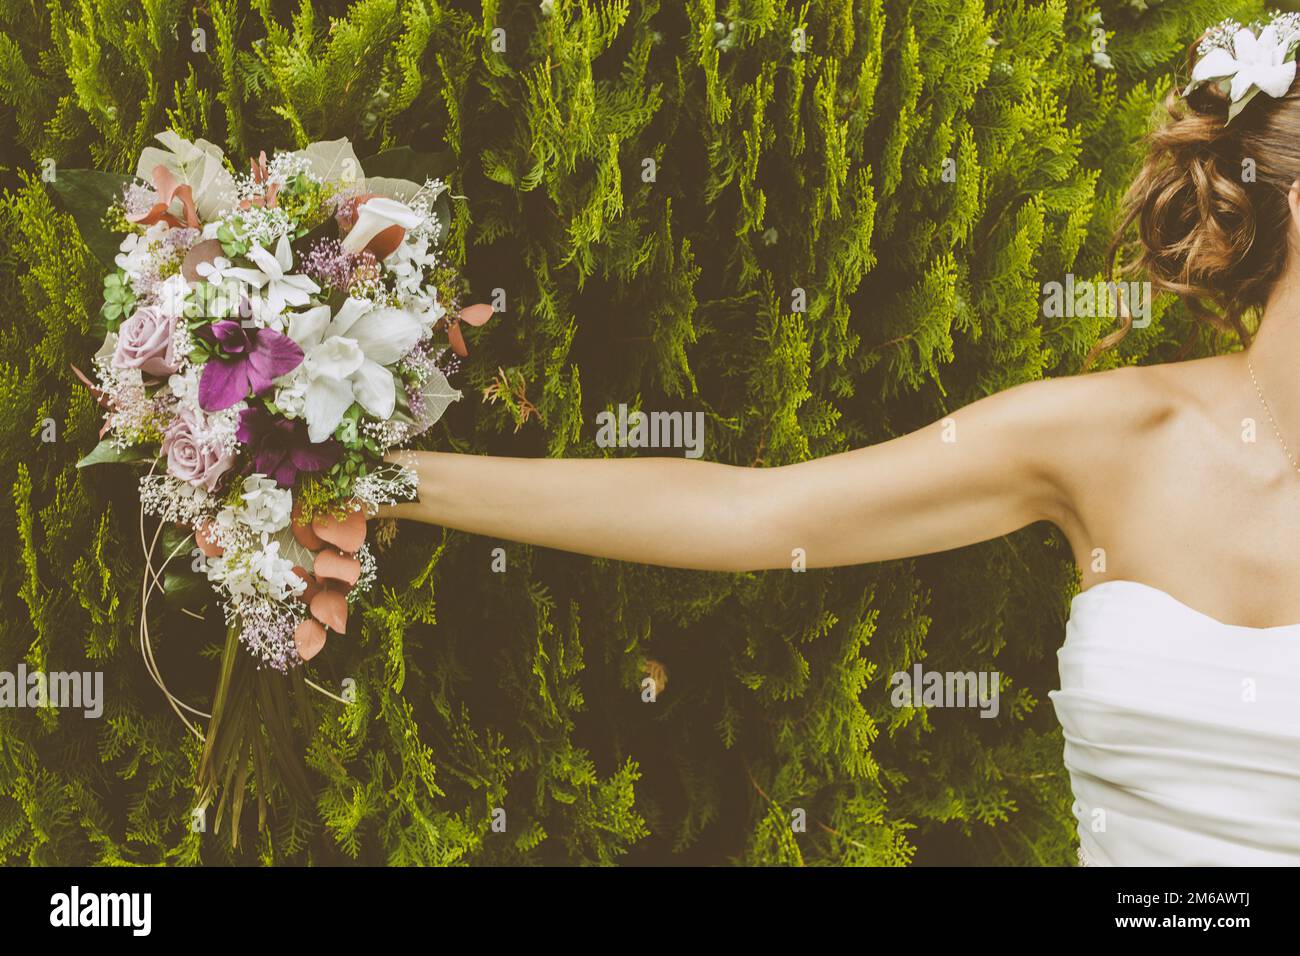 Bride with a Beautiful Bouquet of Flowers Stock Photo